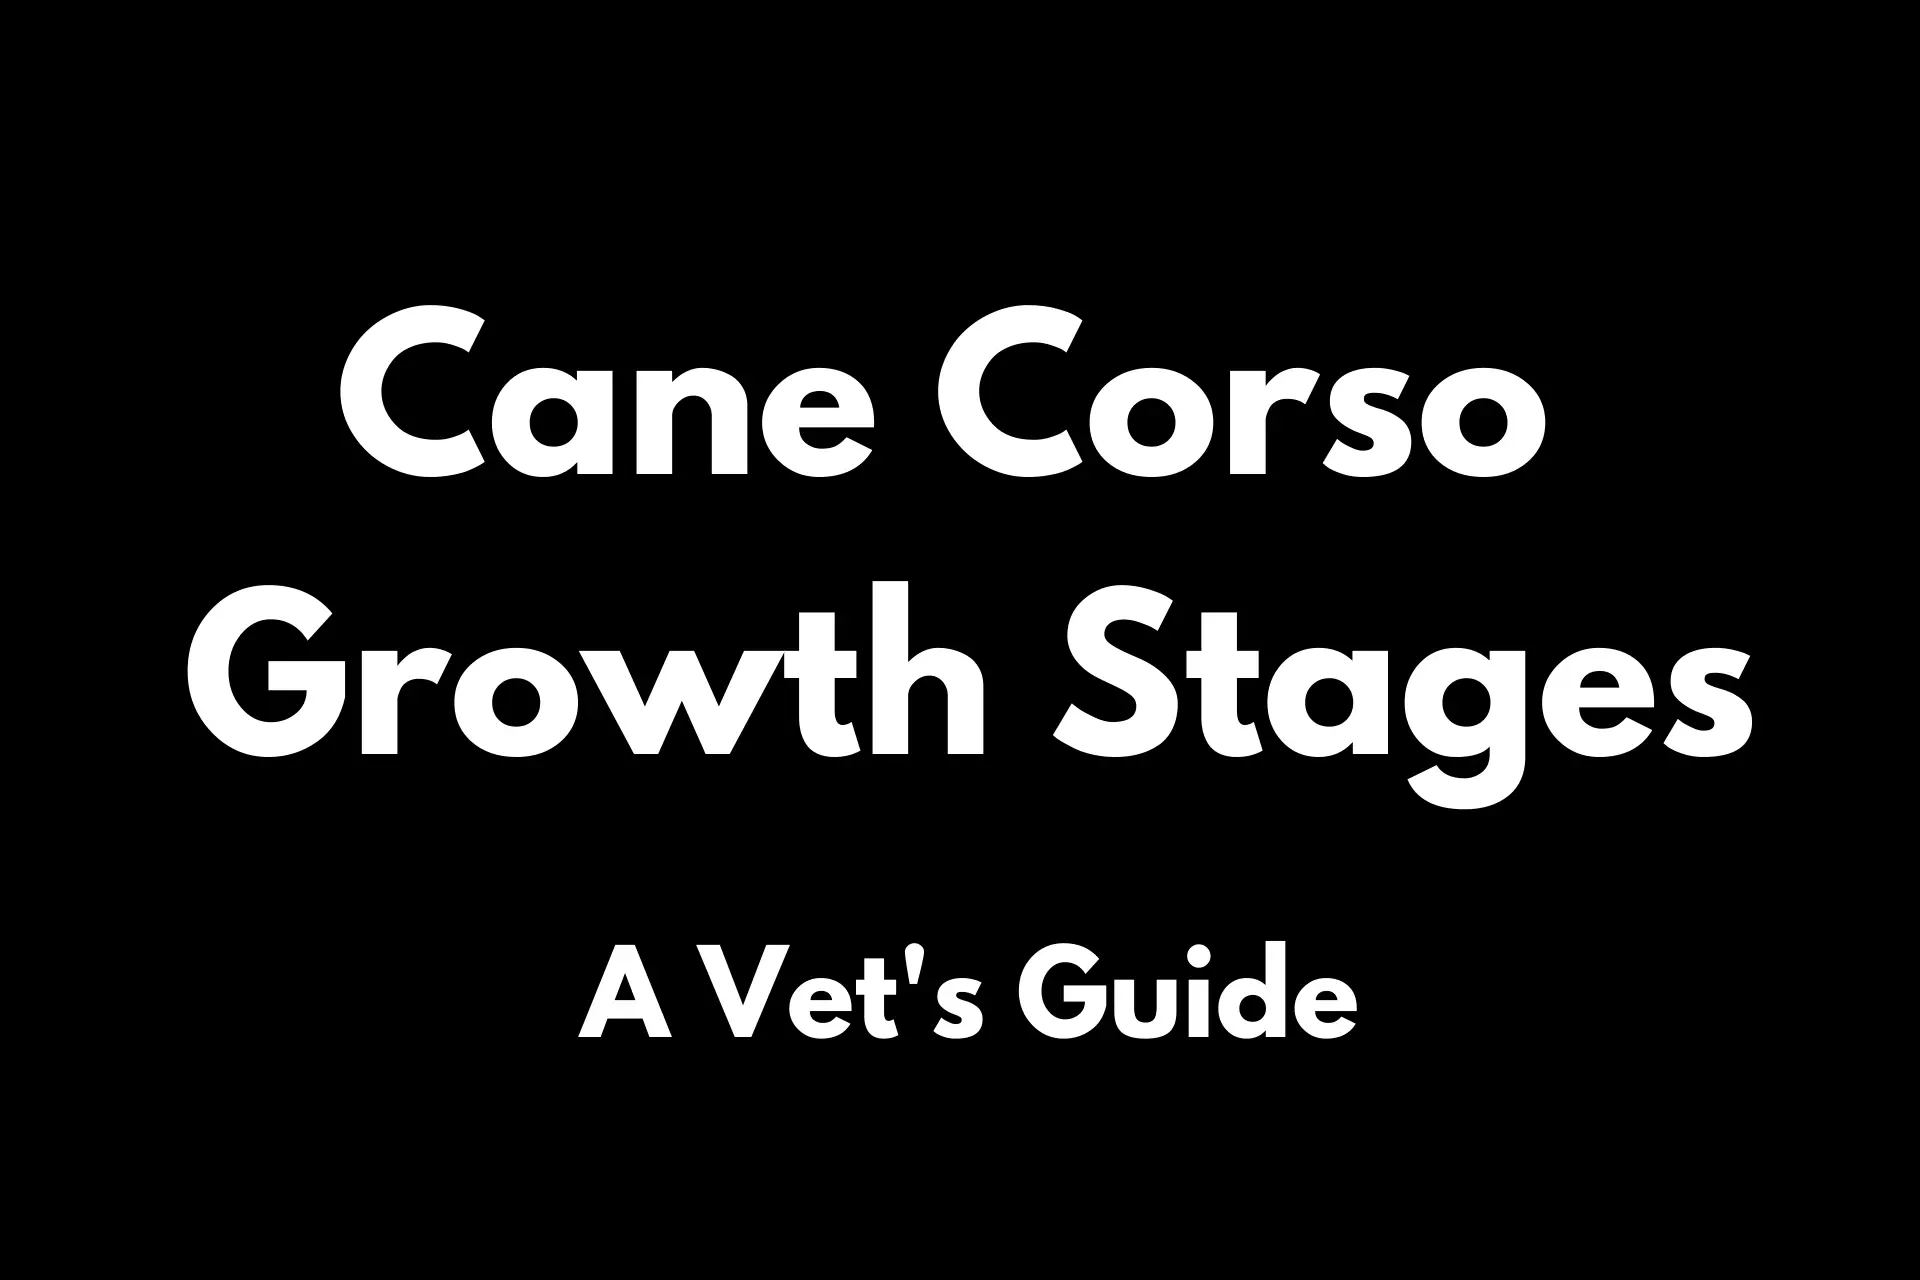 Cane Corso Growth Stages | 2022 Vet’s Guide